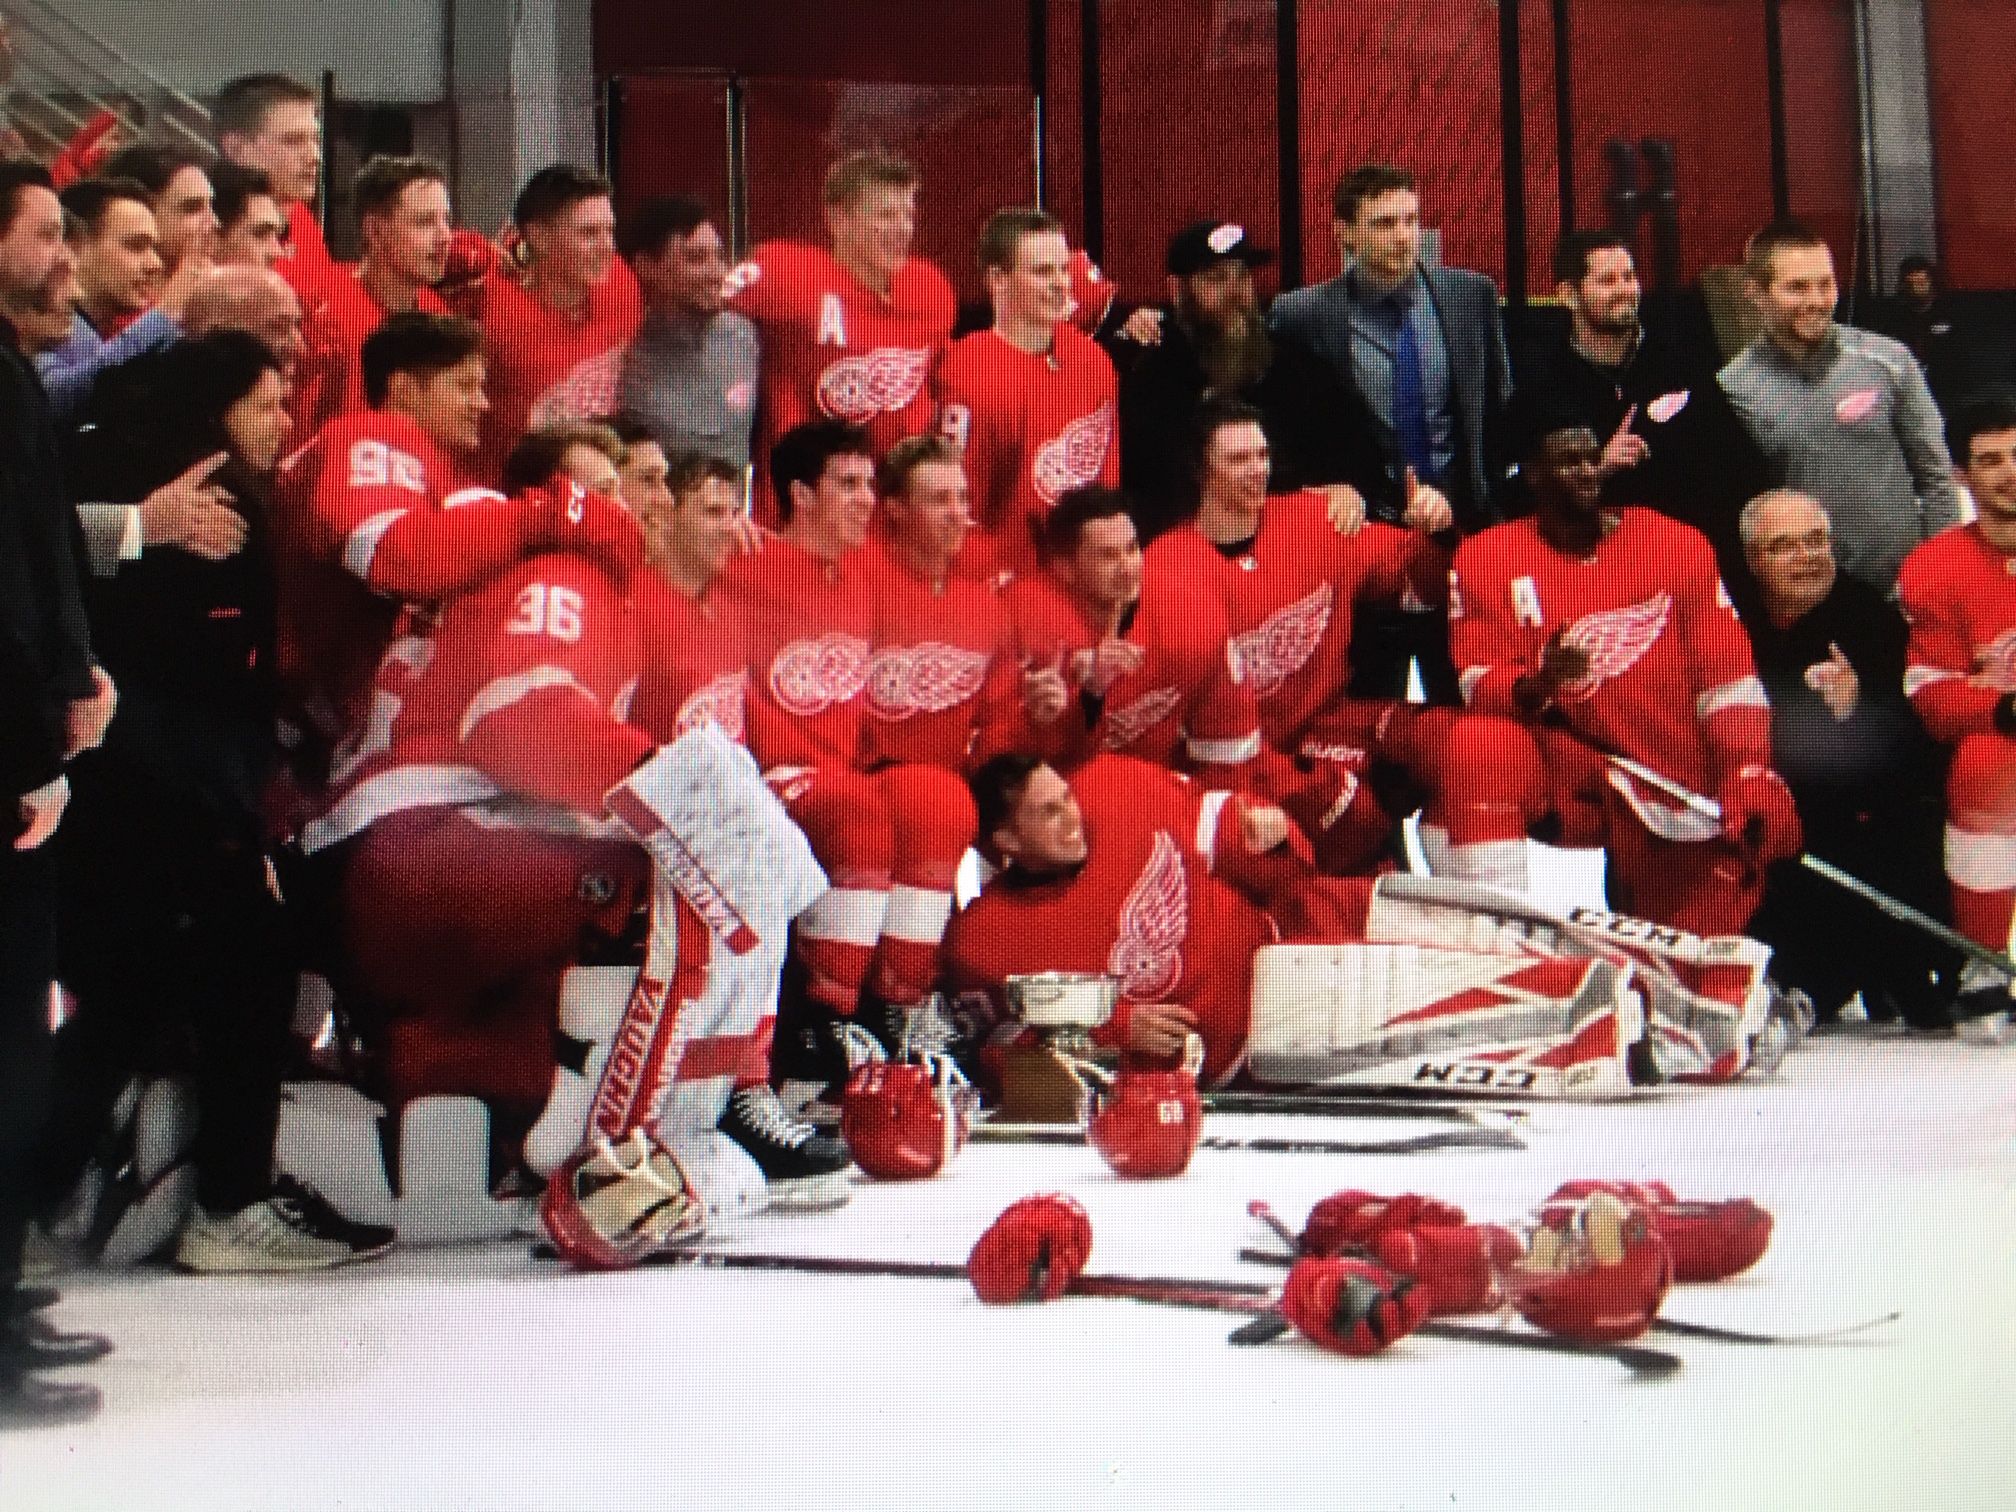 11 observations from the Red Wings' title-winning prospect